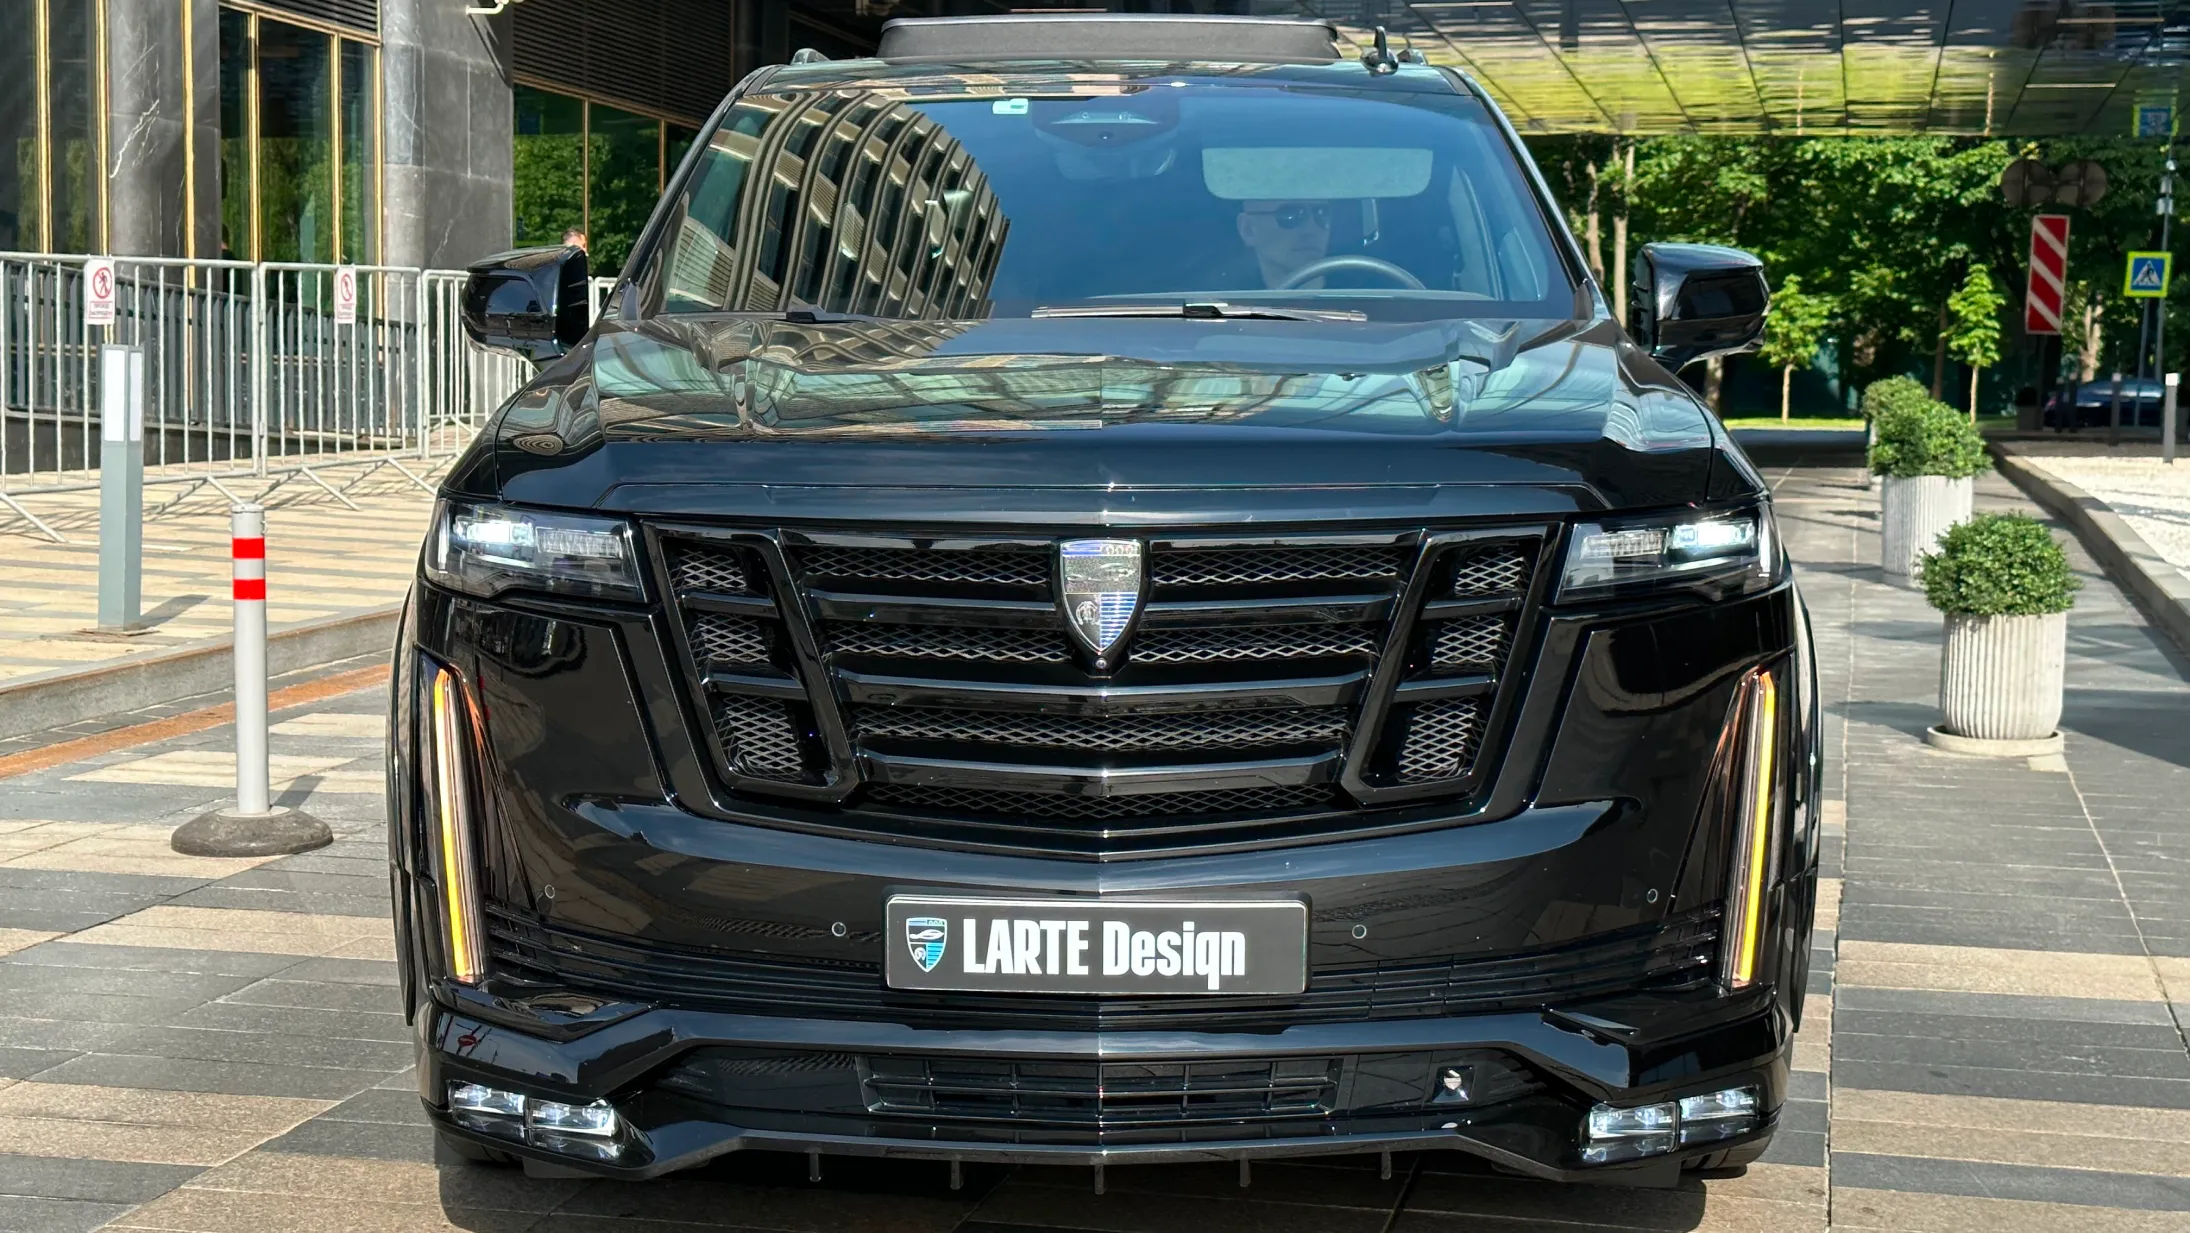 Front view on a Cadillac Escalade with a body kit giving the car a custom appearance